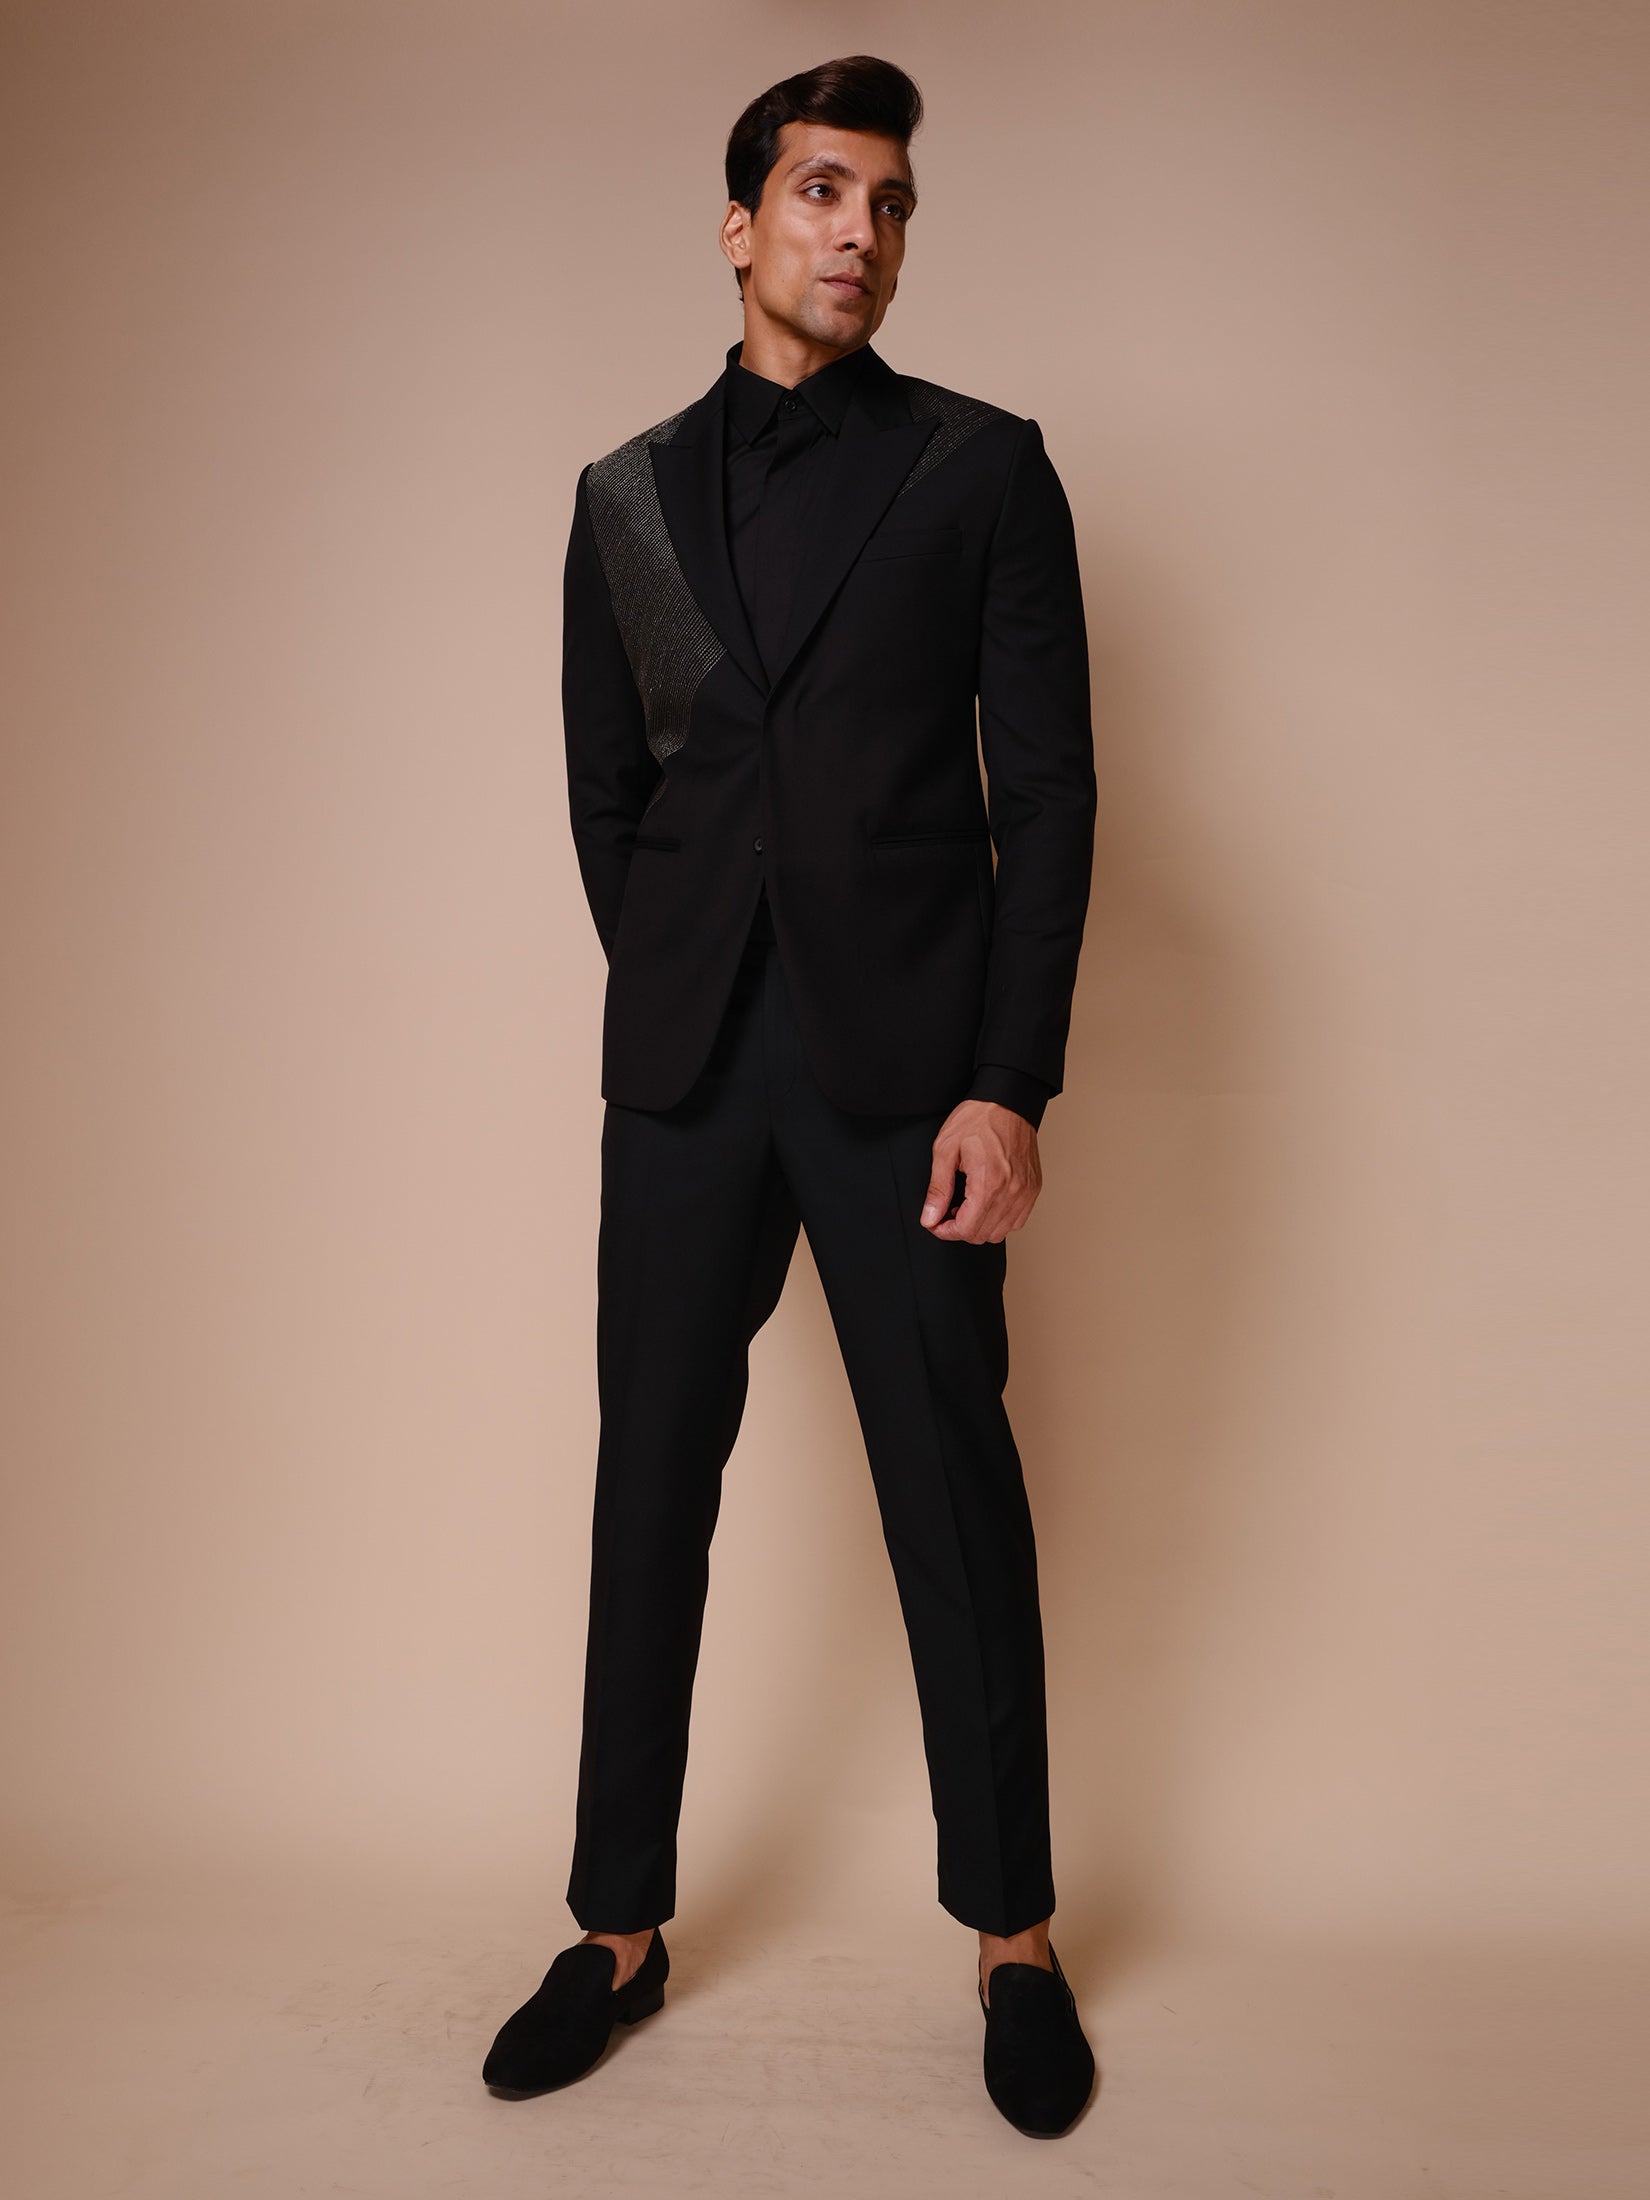 Black Peak Lapel Suit With Diagonal Gold Textured Lines Across Chest Paired With Trousers And Tonal Shirt